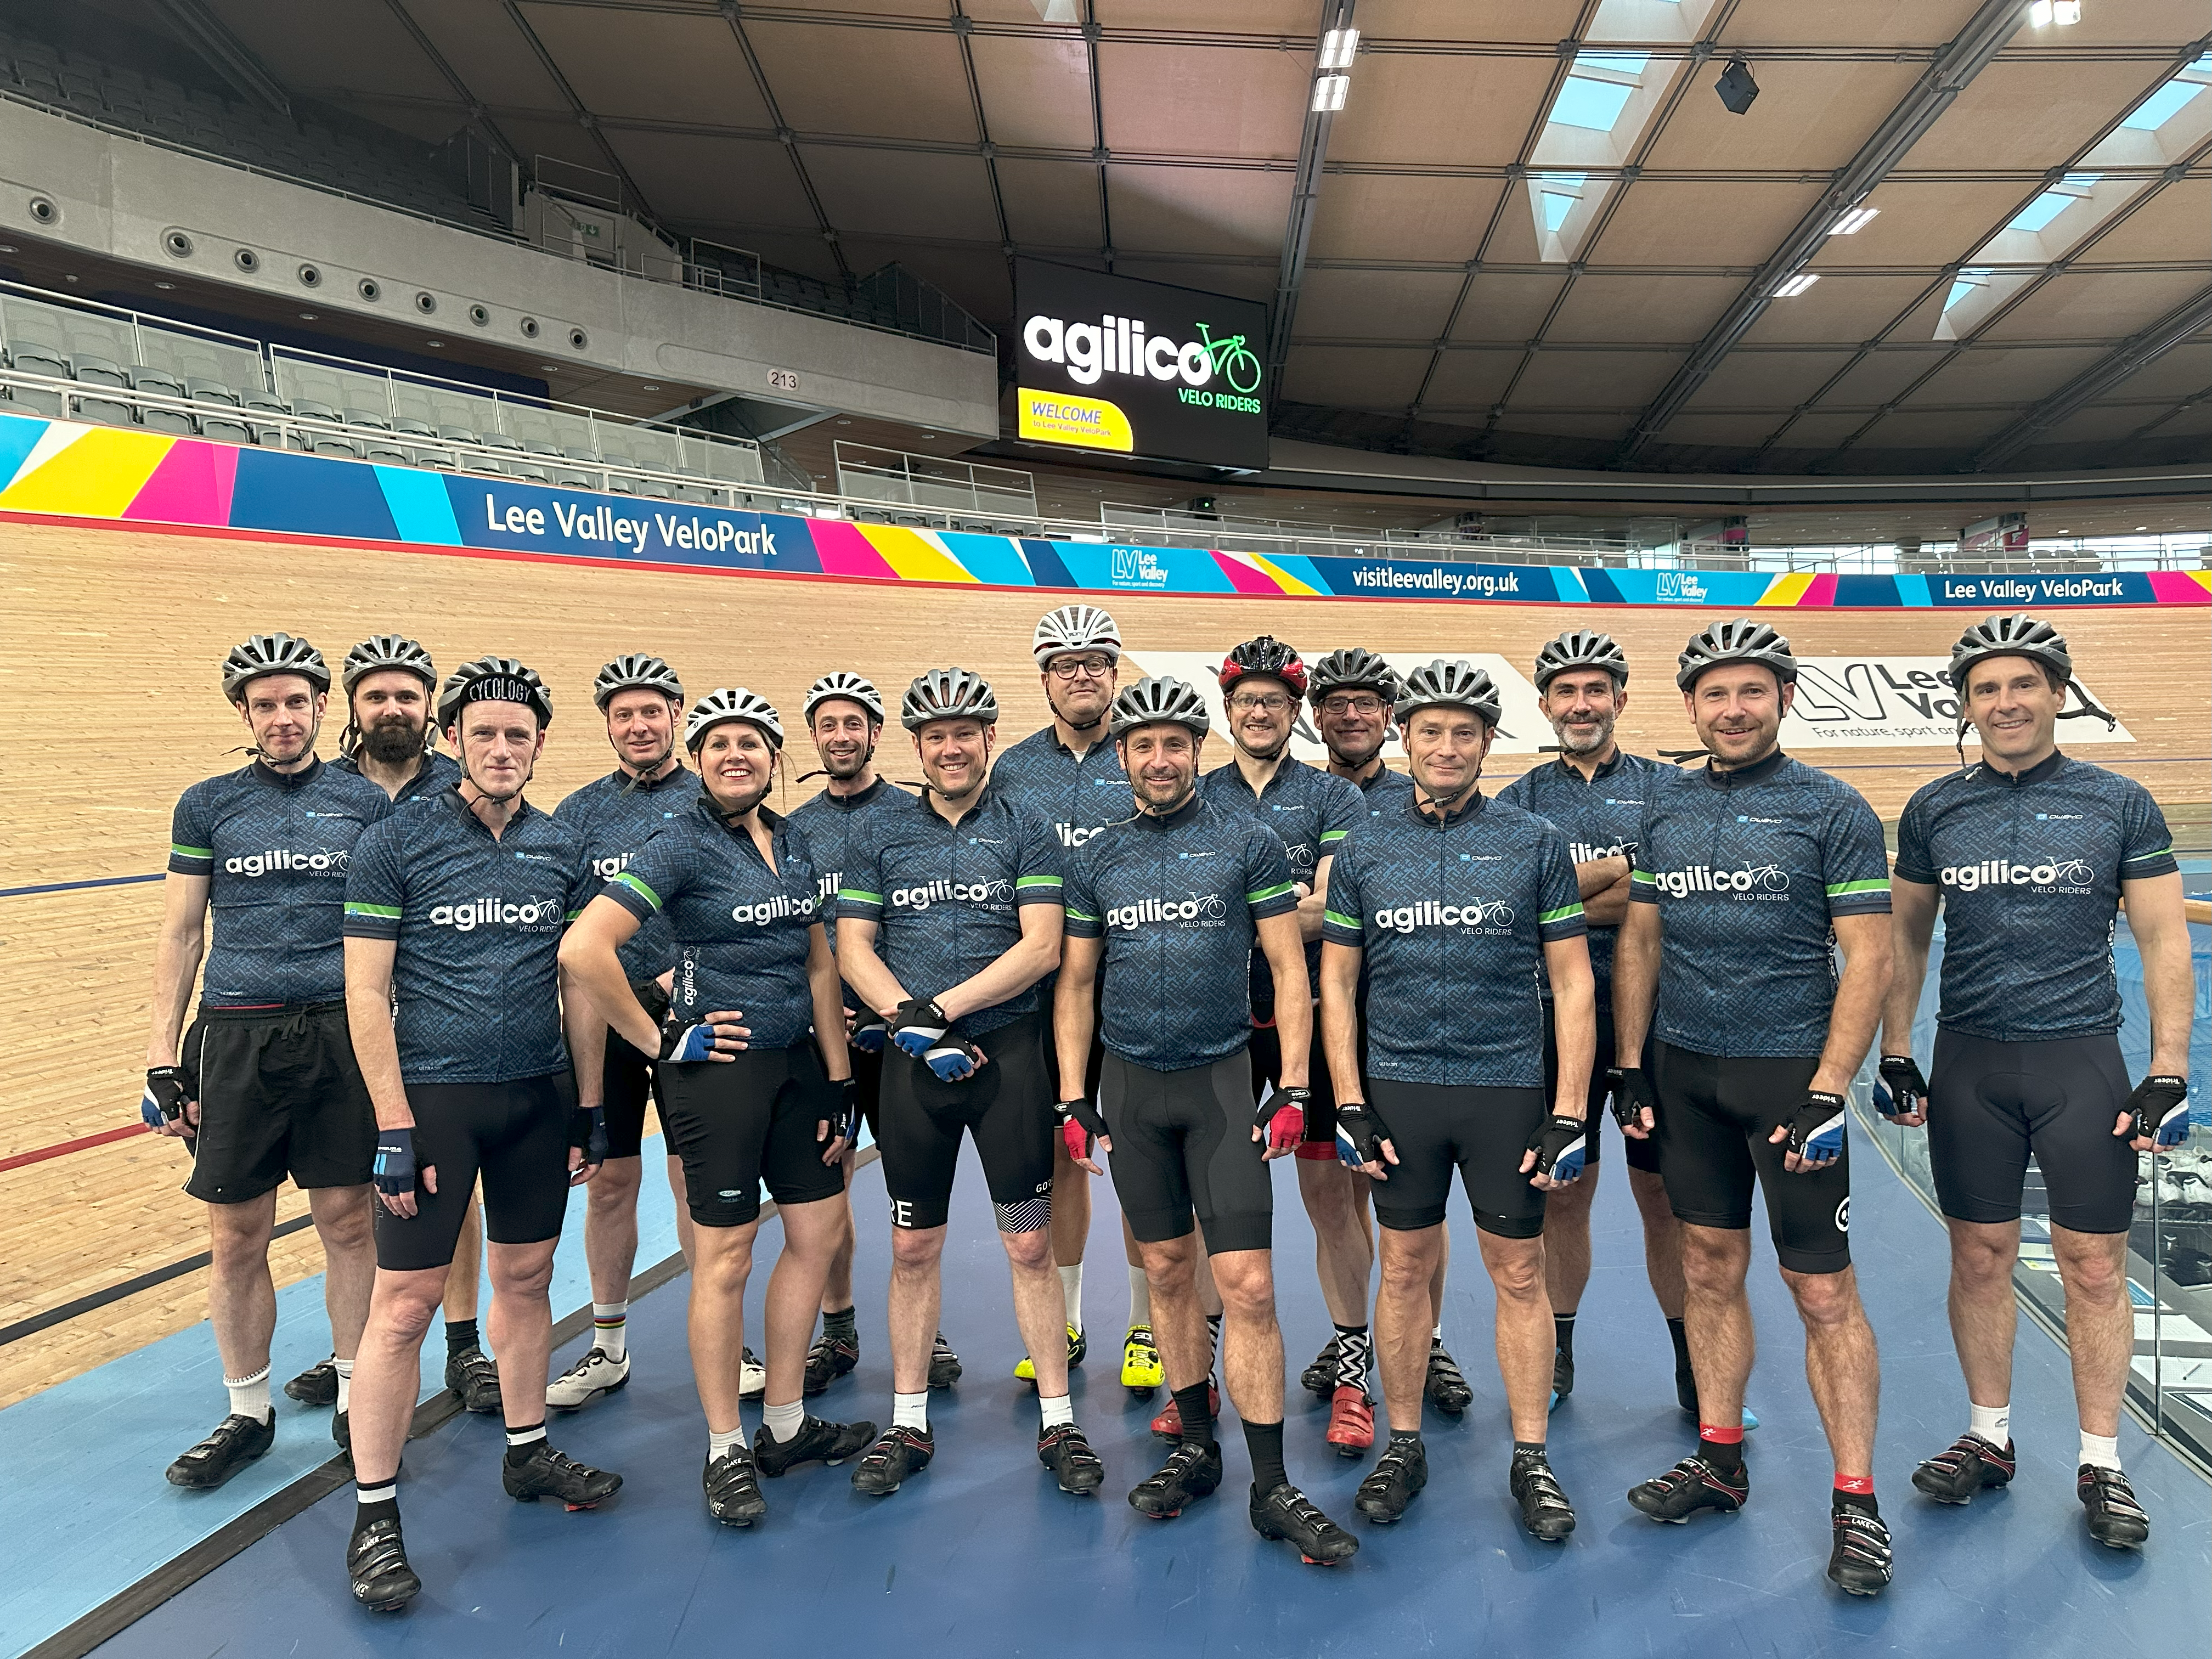 Agilico Velo Riders Take to the London Olympic Velodrome